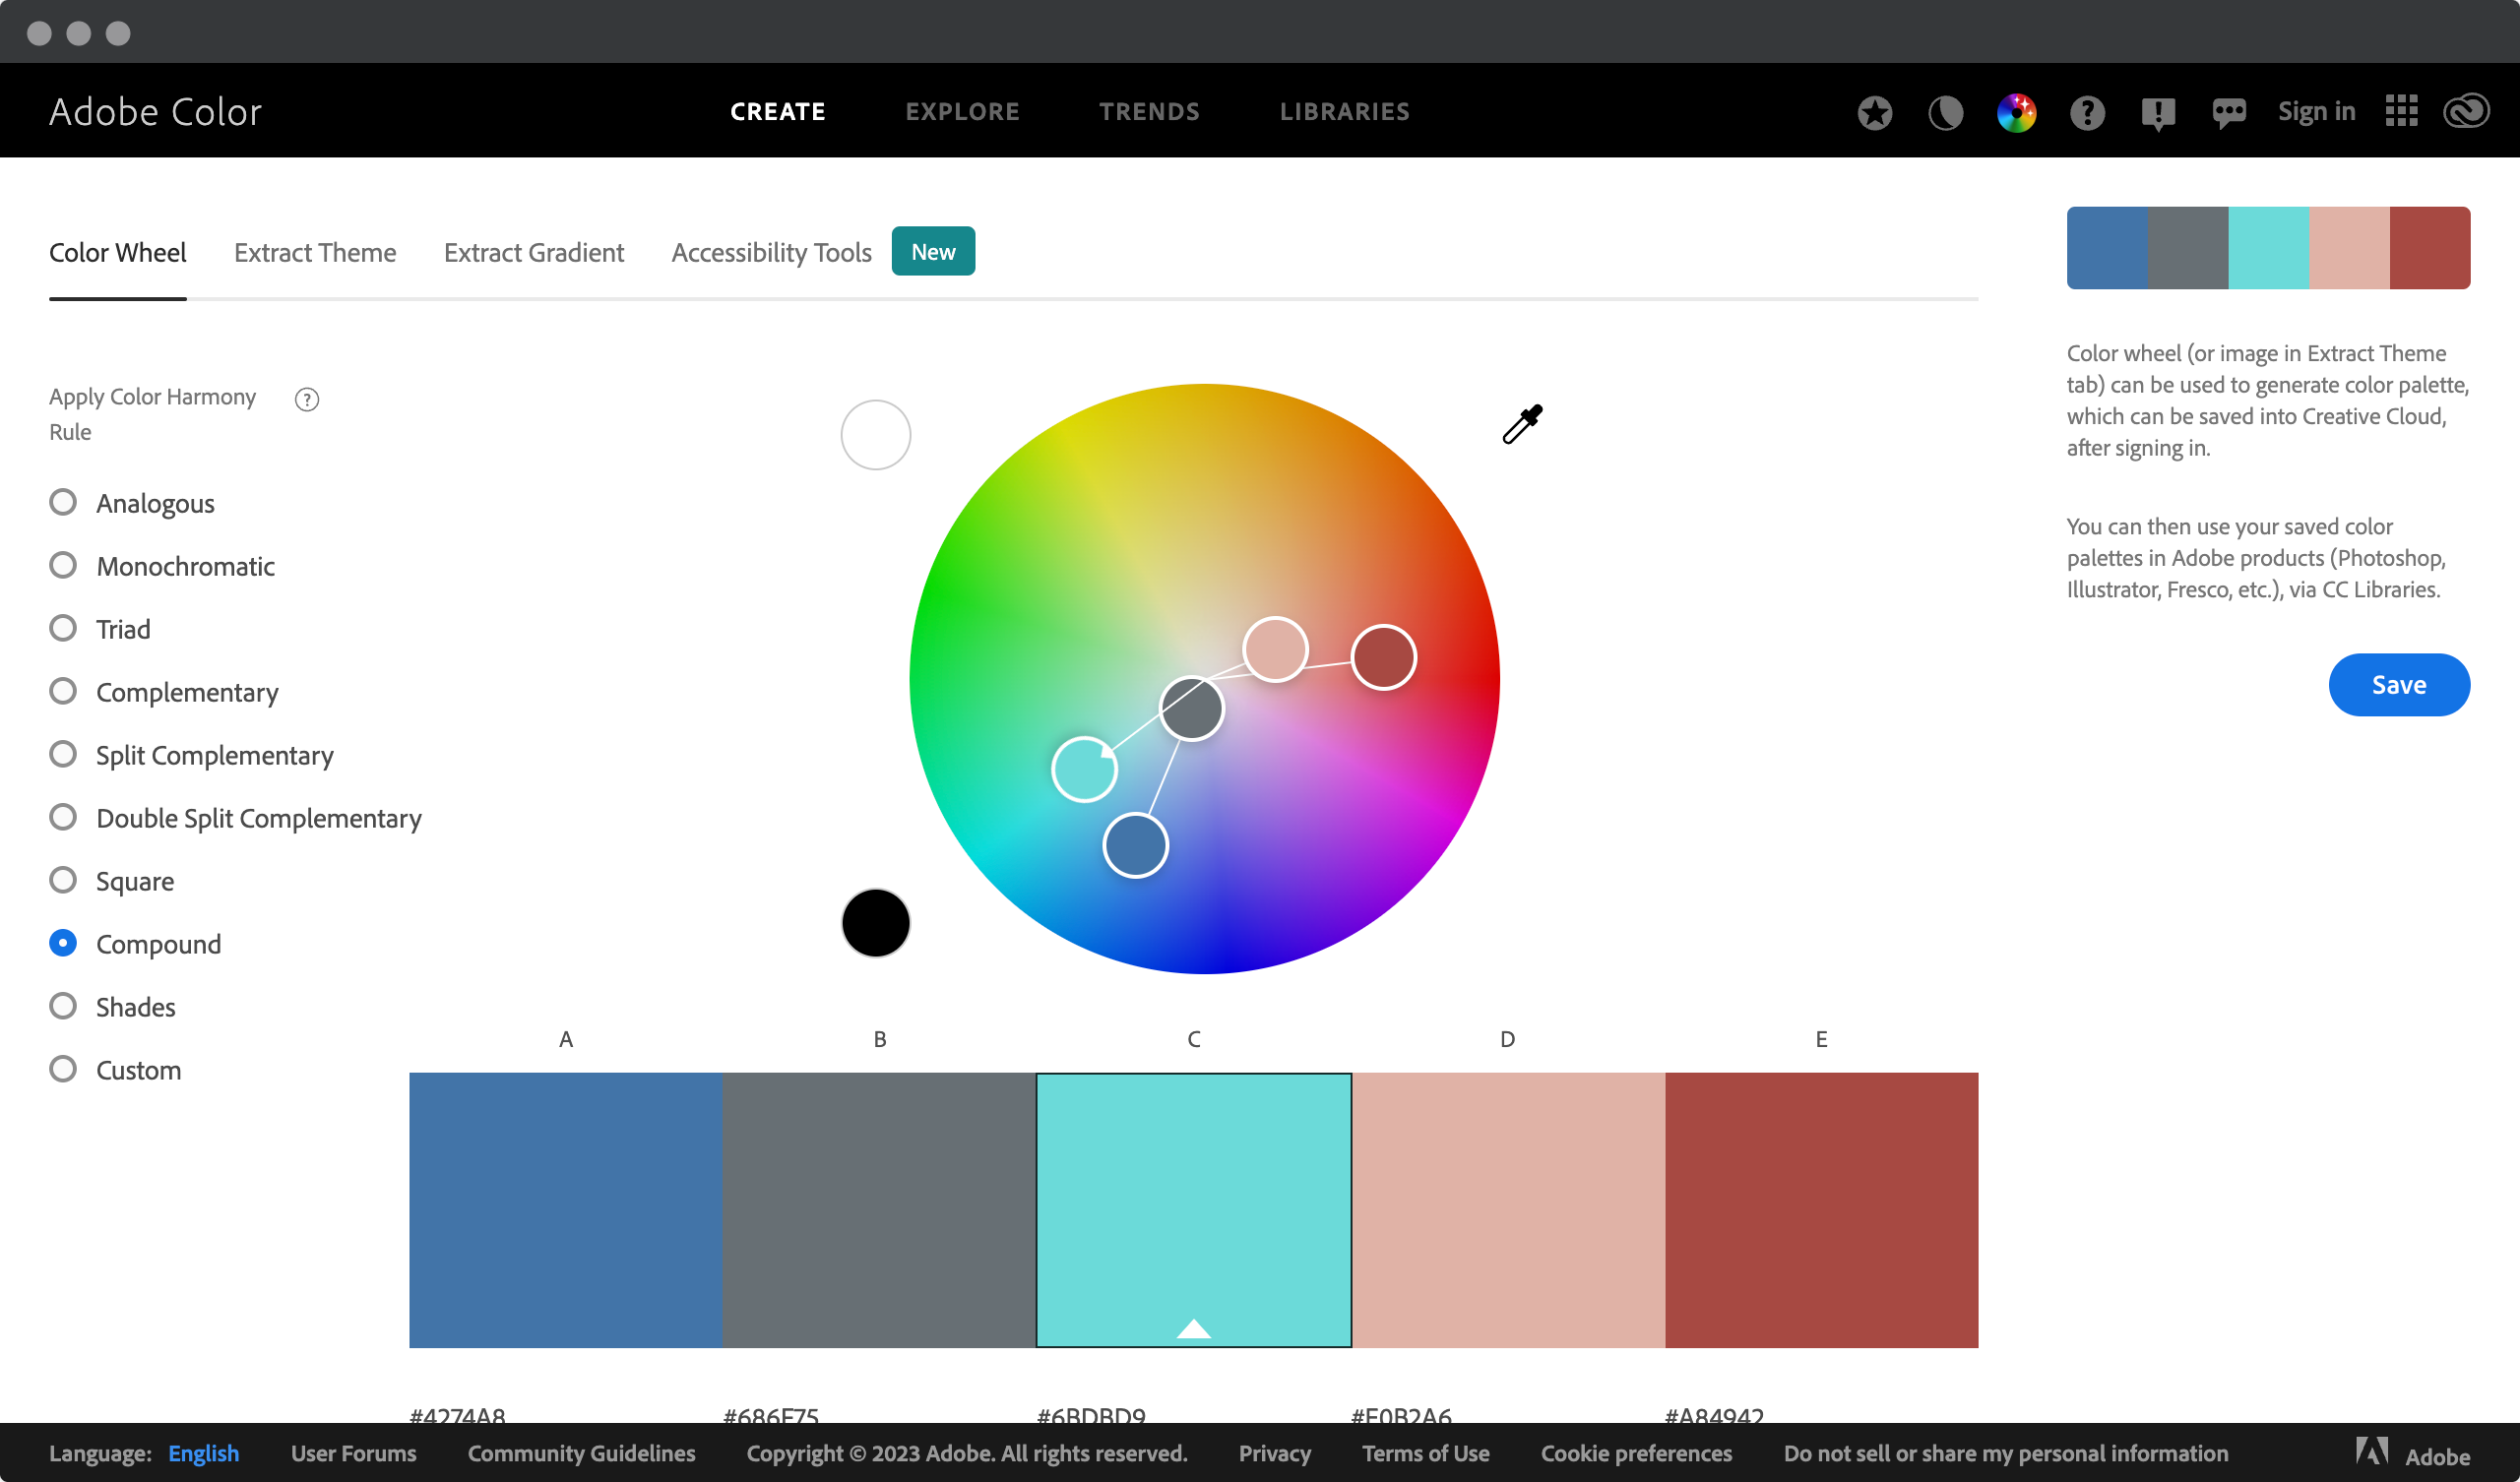 Screenshot of a Web page showing the compound colors in Adobe Color Wheel tool